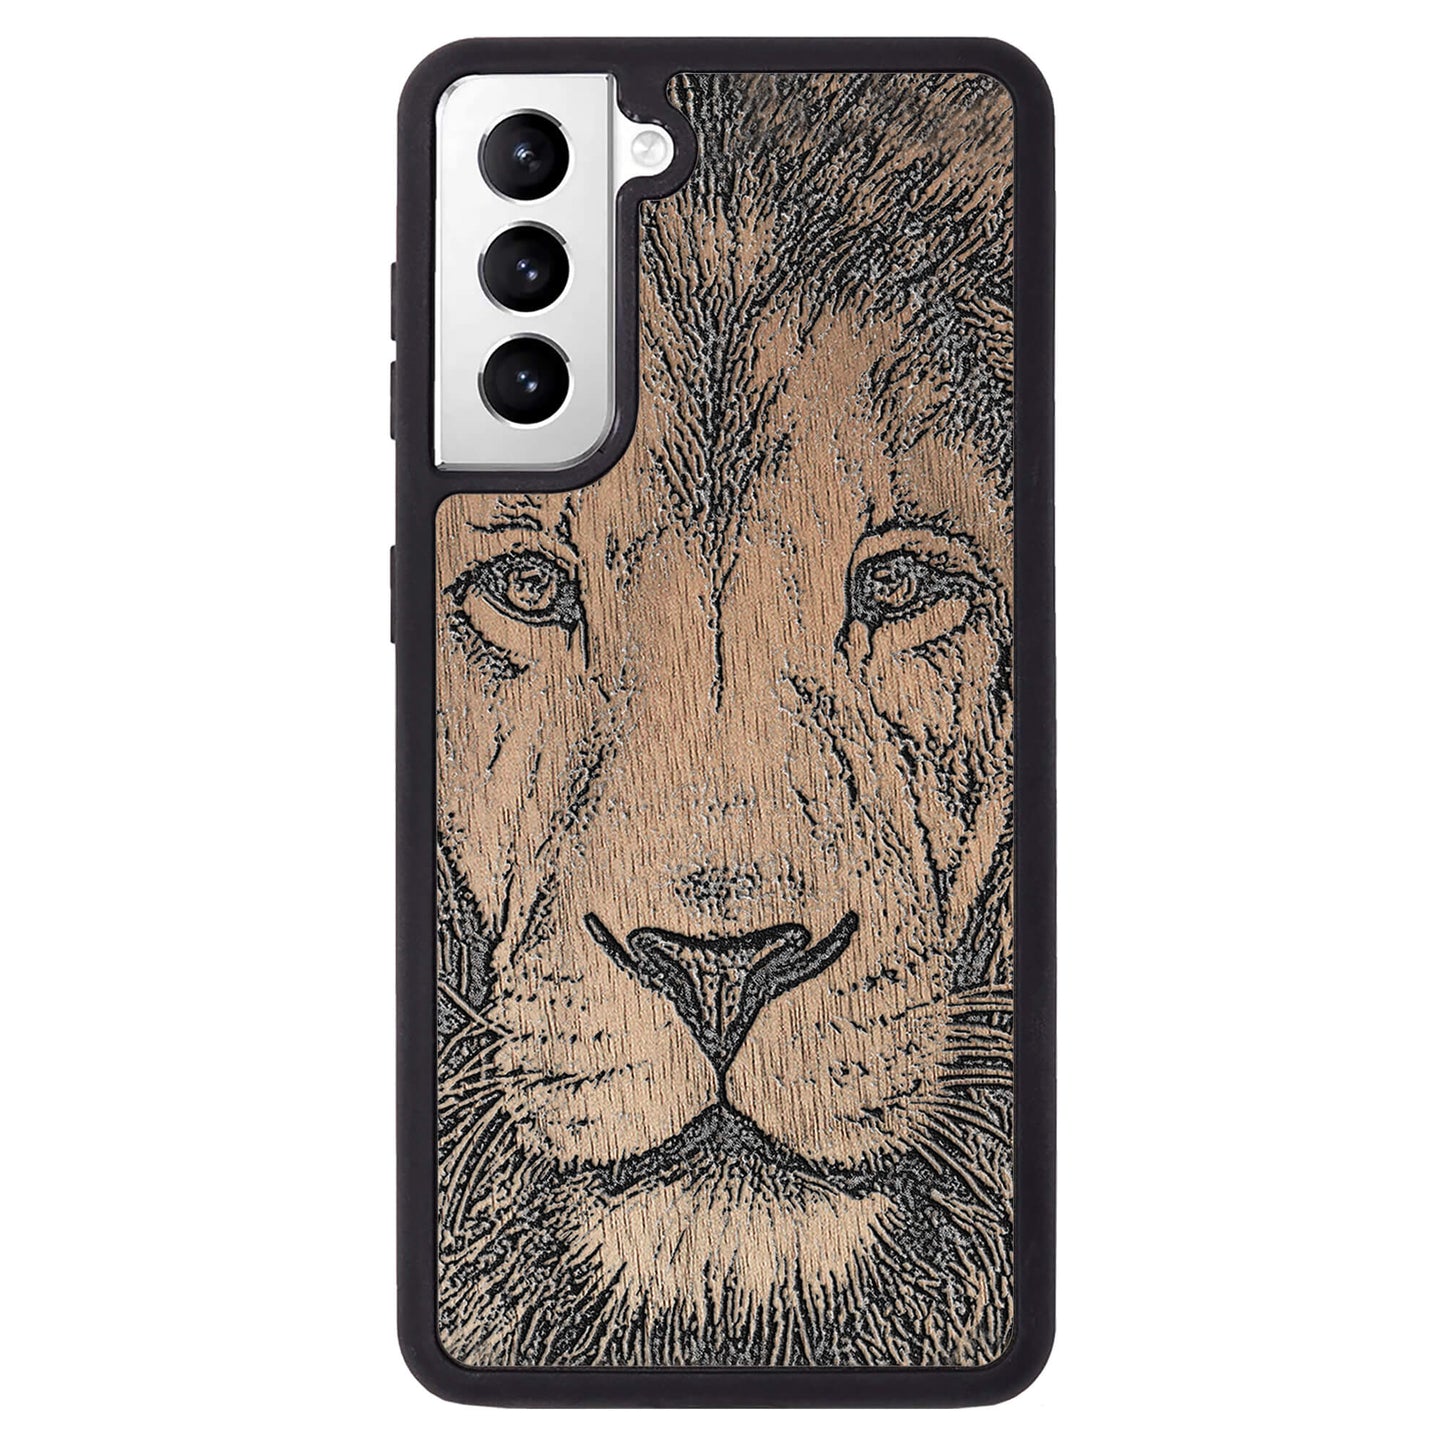 Wooden Case for Samsung Galaxy S21 Lion face